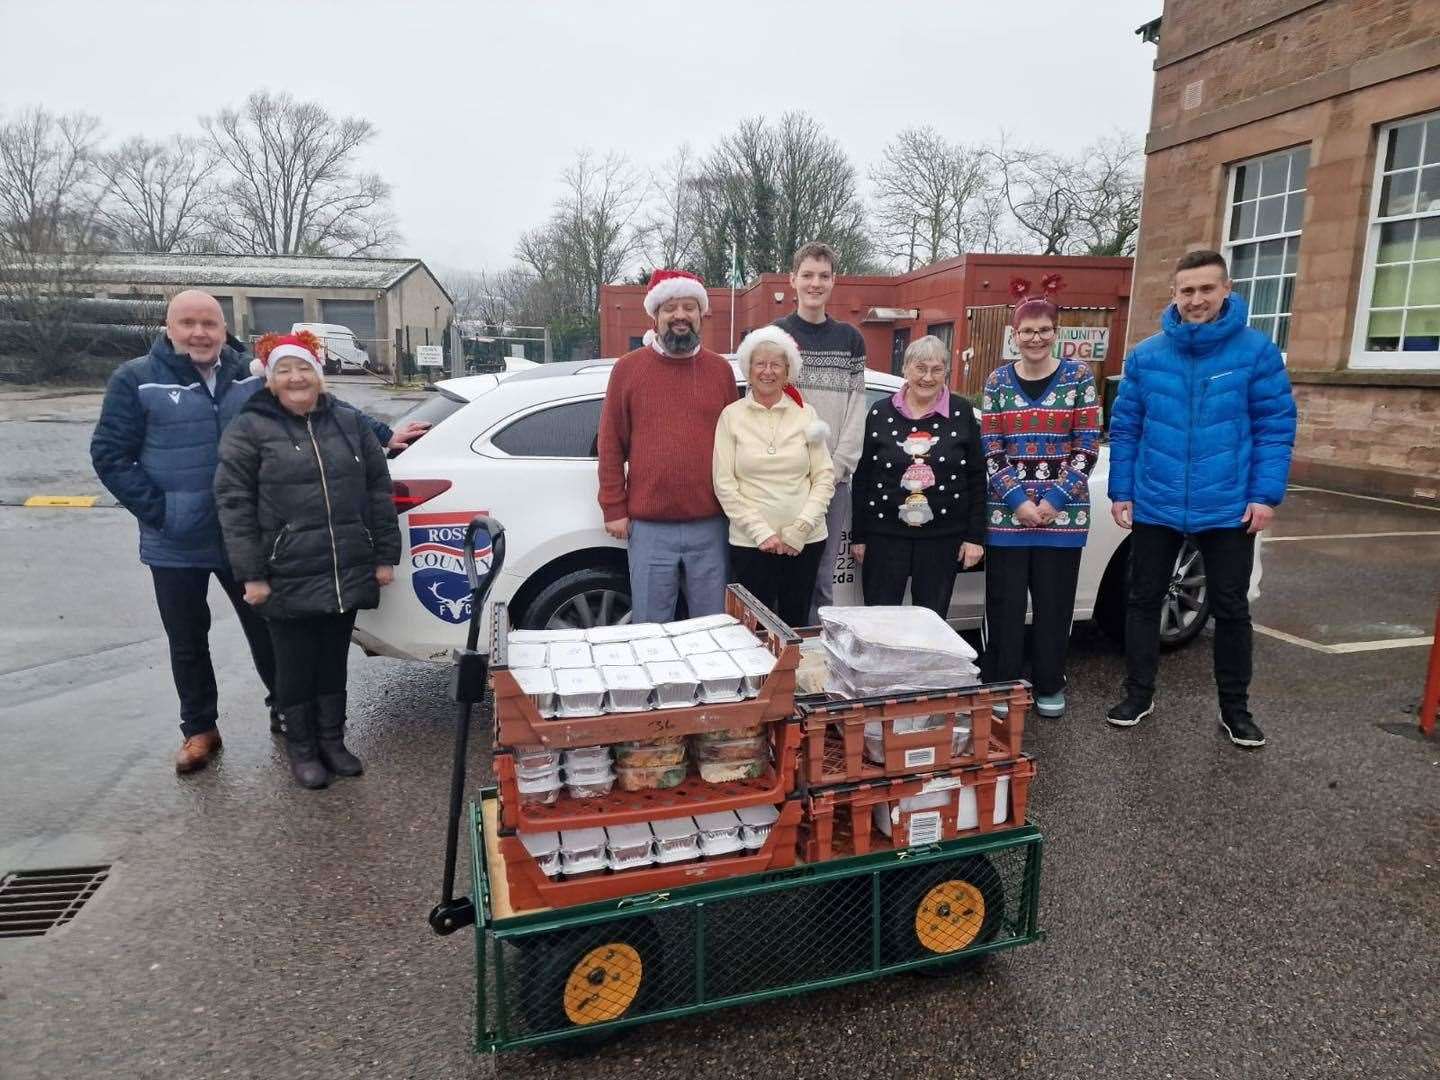 News of the food donation was well received by the club's supporters. Picture: Ross County FC